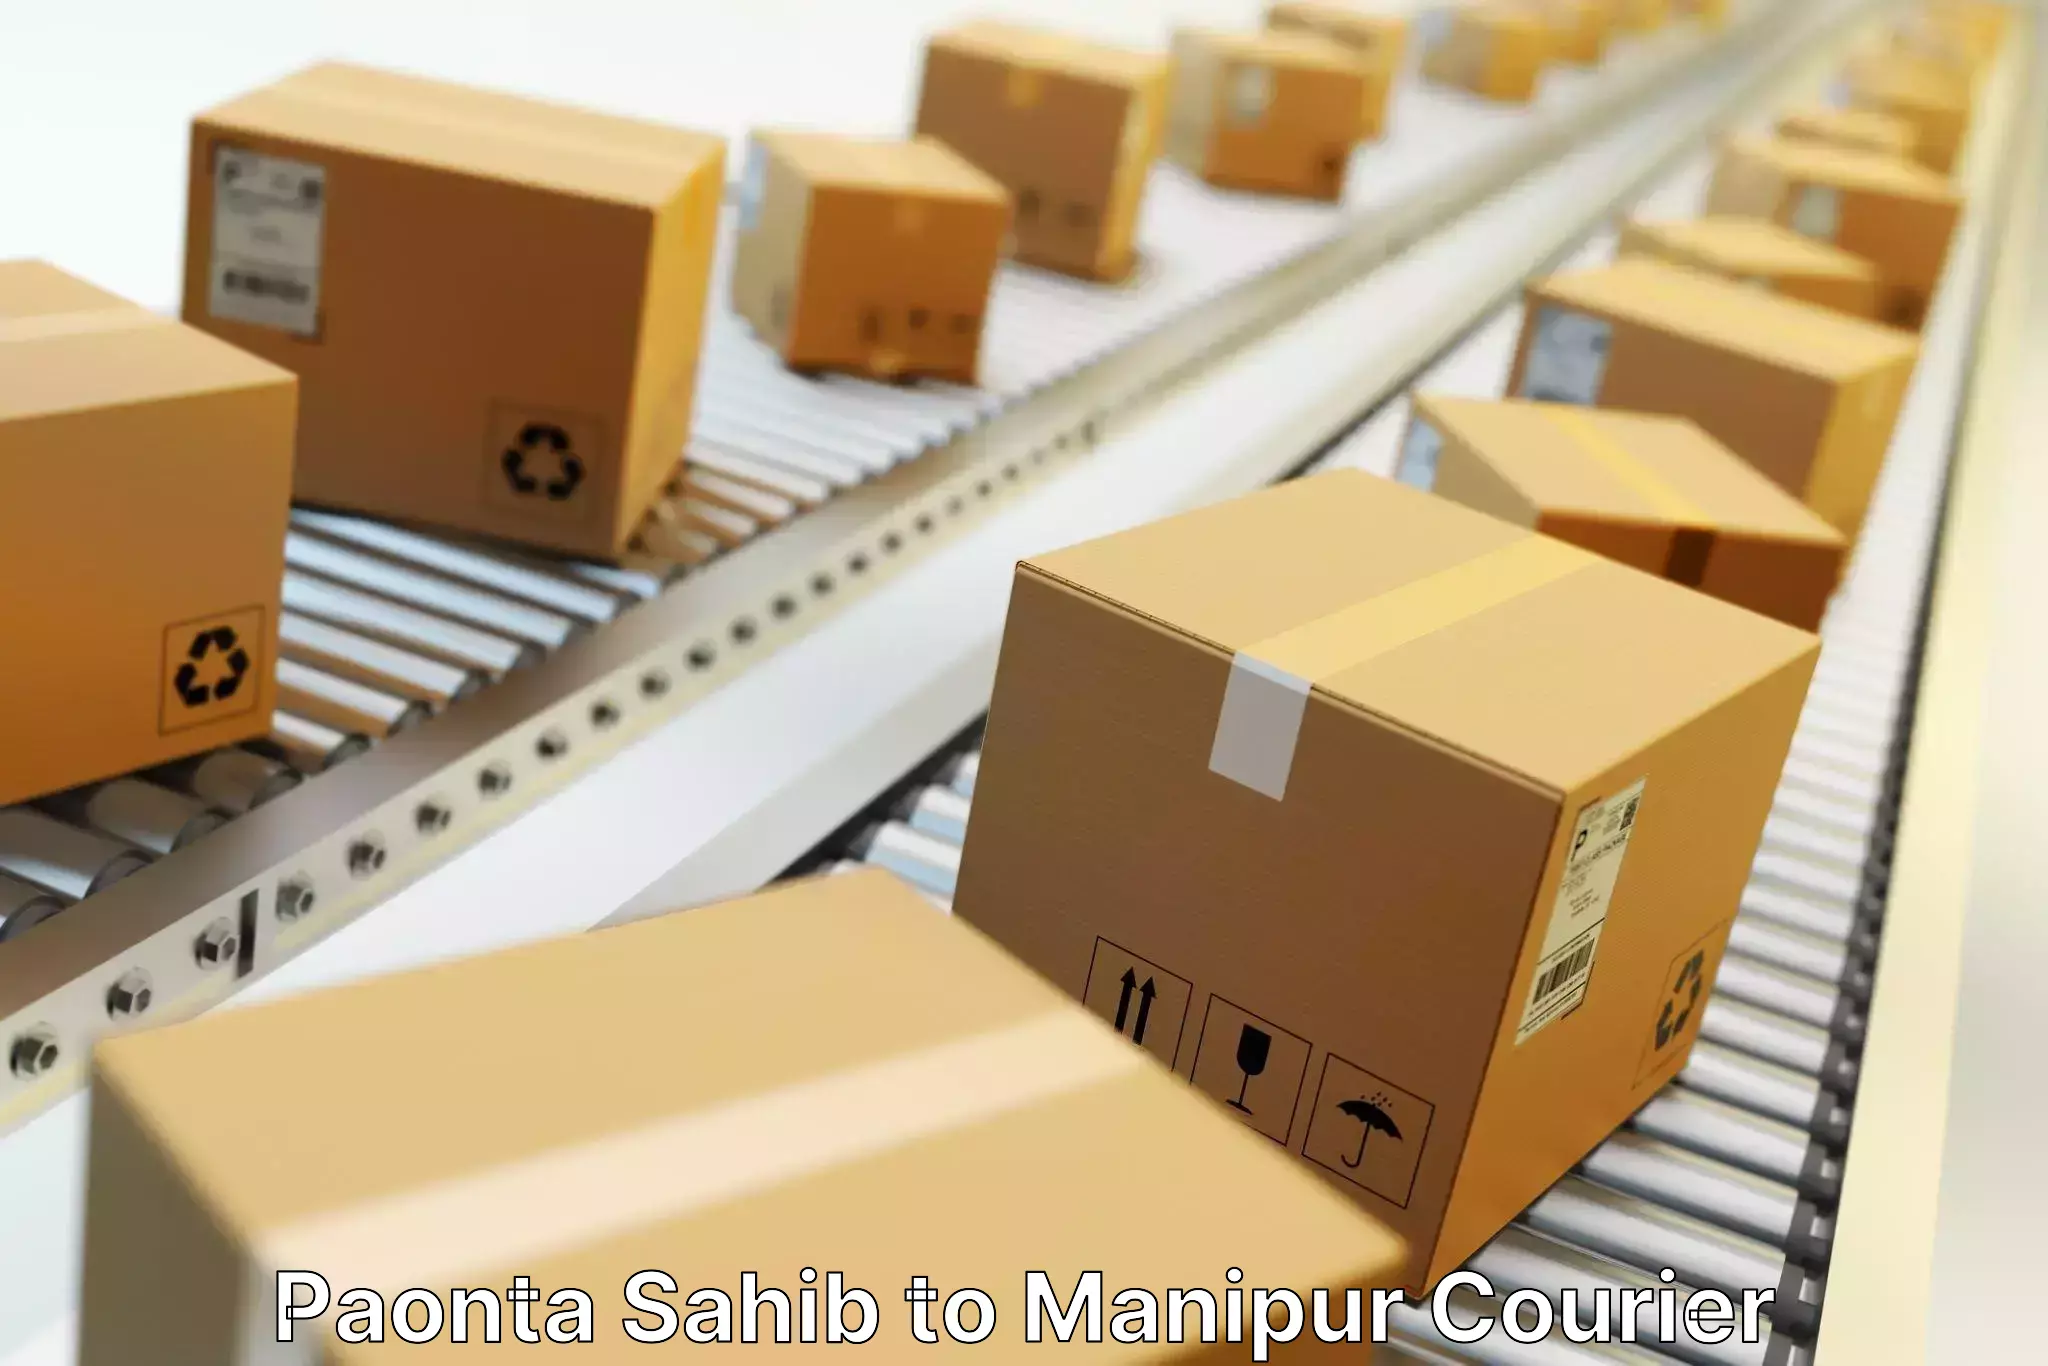 Same-day delivery solutions Paonta Sahib to Imphal